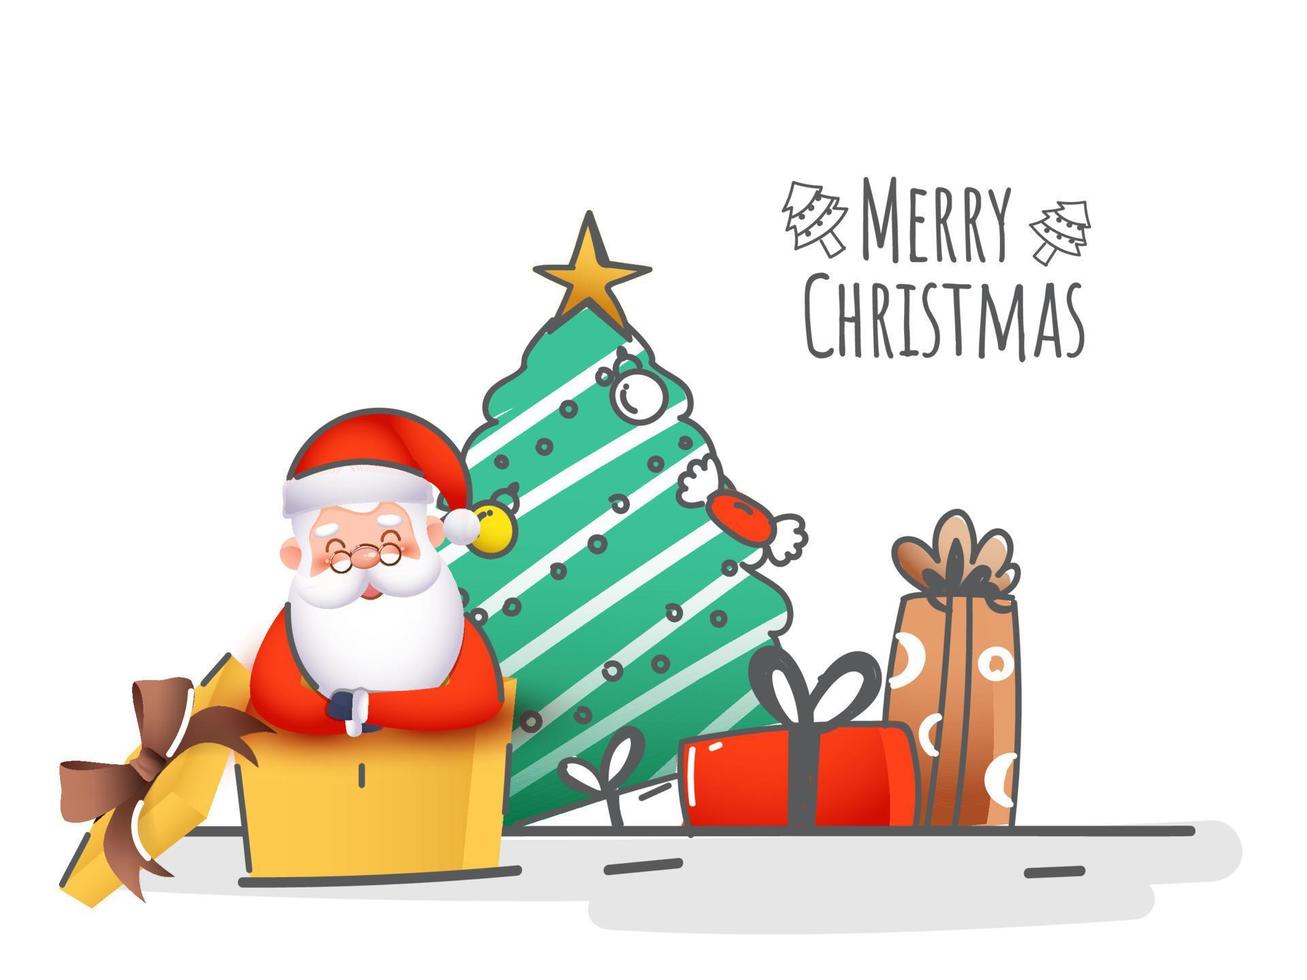 Cartoon Santa Claus Inside Gift Box with Xmas Tree on White Background for Merry Christmas Celebration. vector